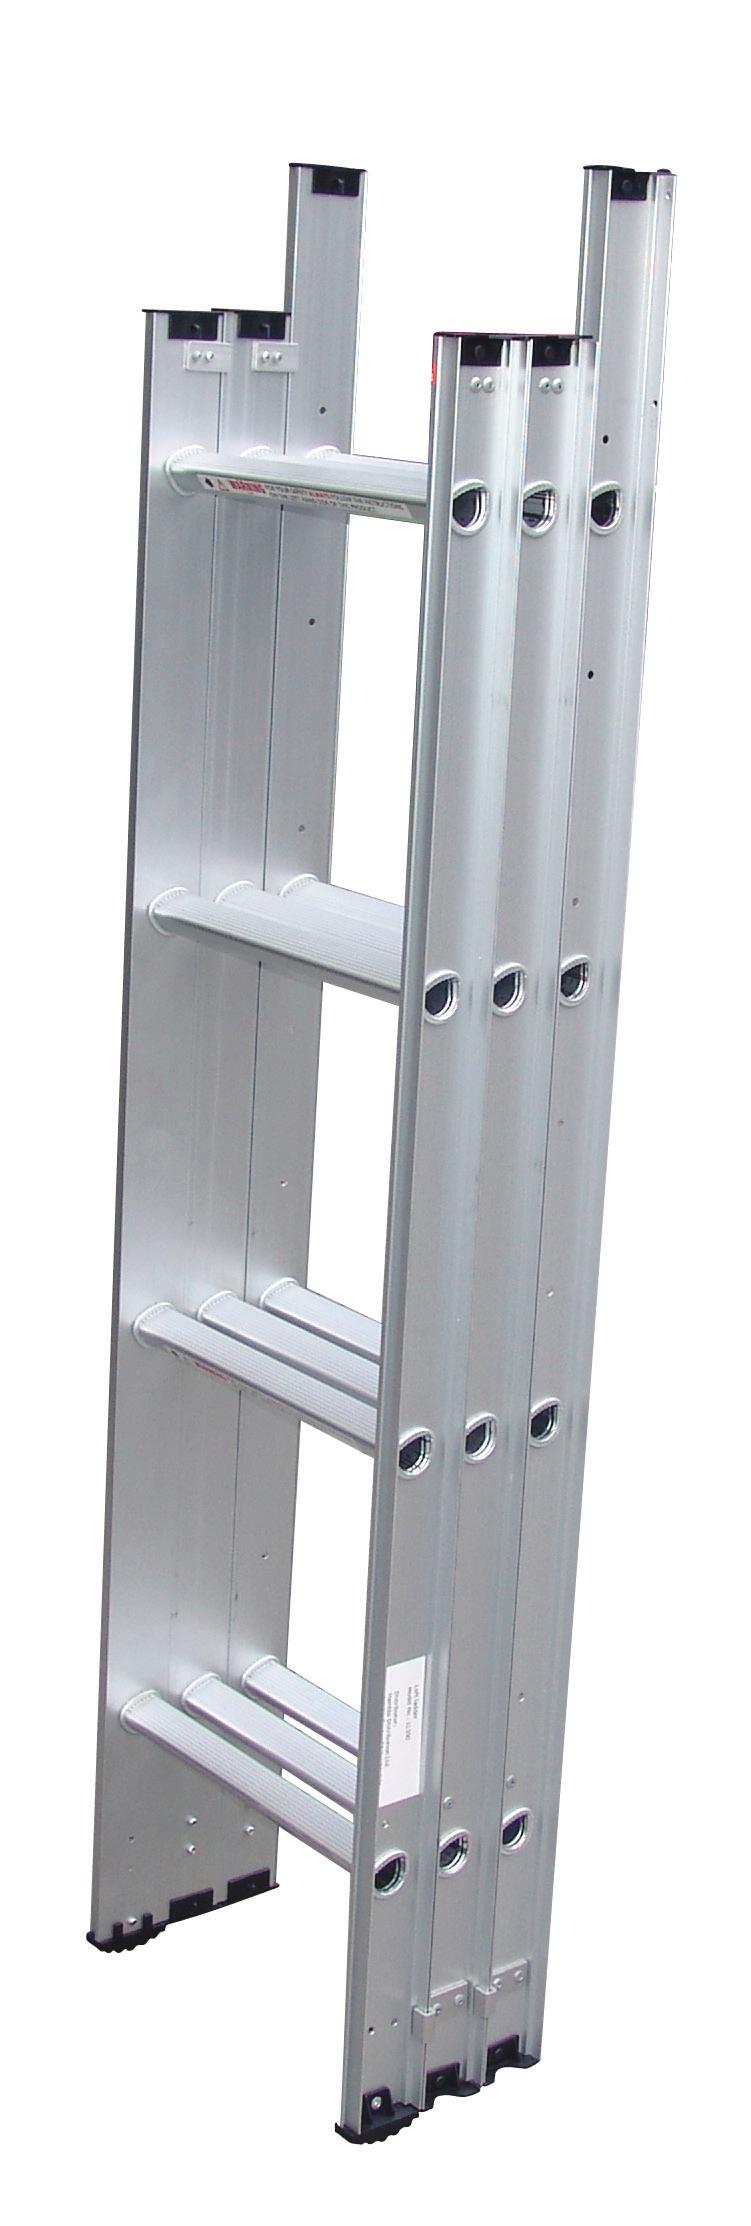 ladder is suitable for residential spaces.